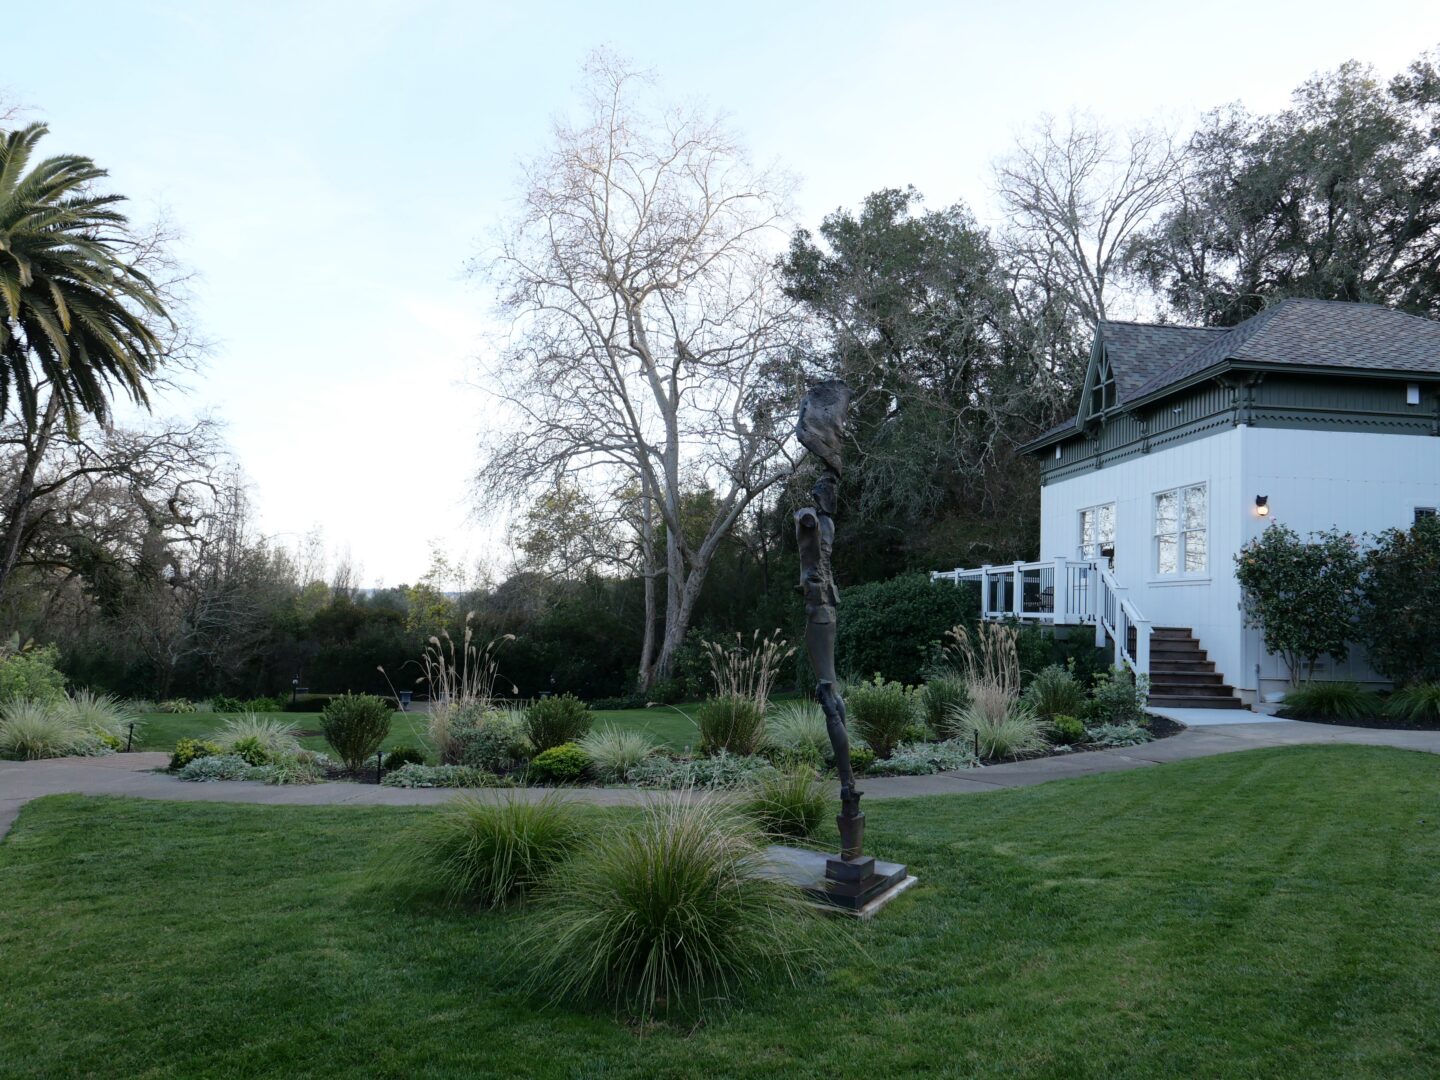 Overlooking the gardens at The Madrona in Healdsburg